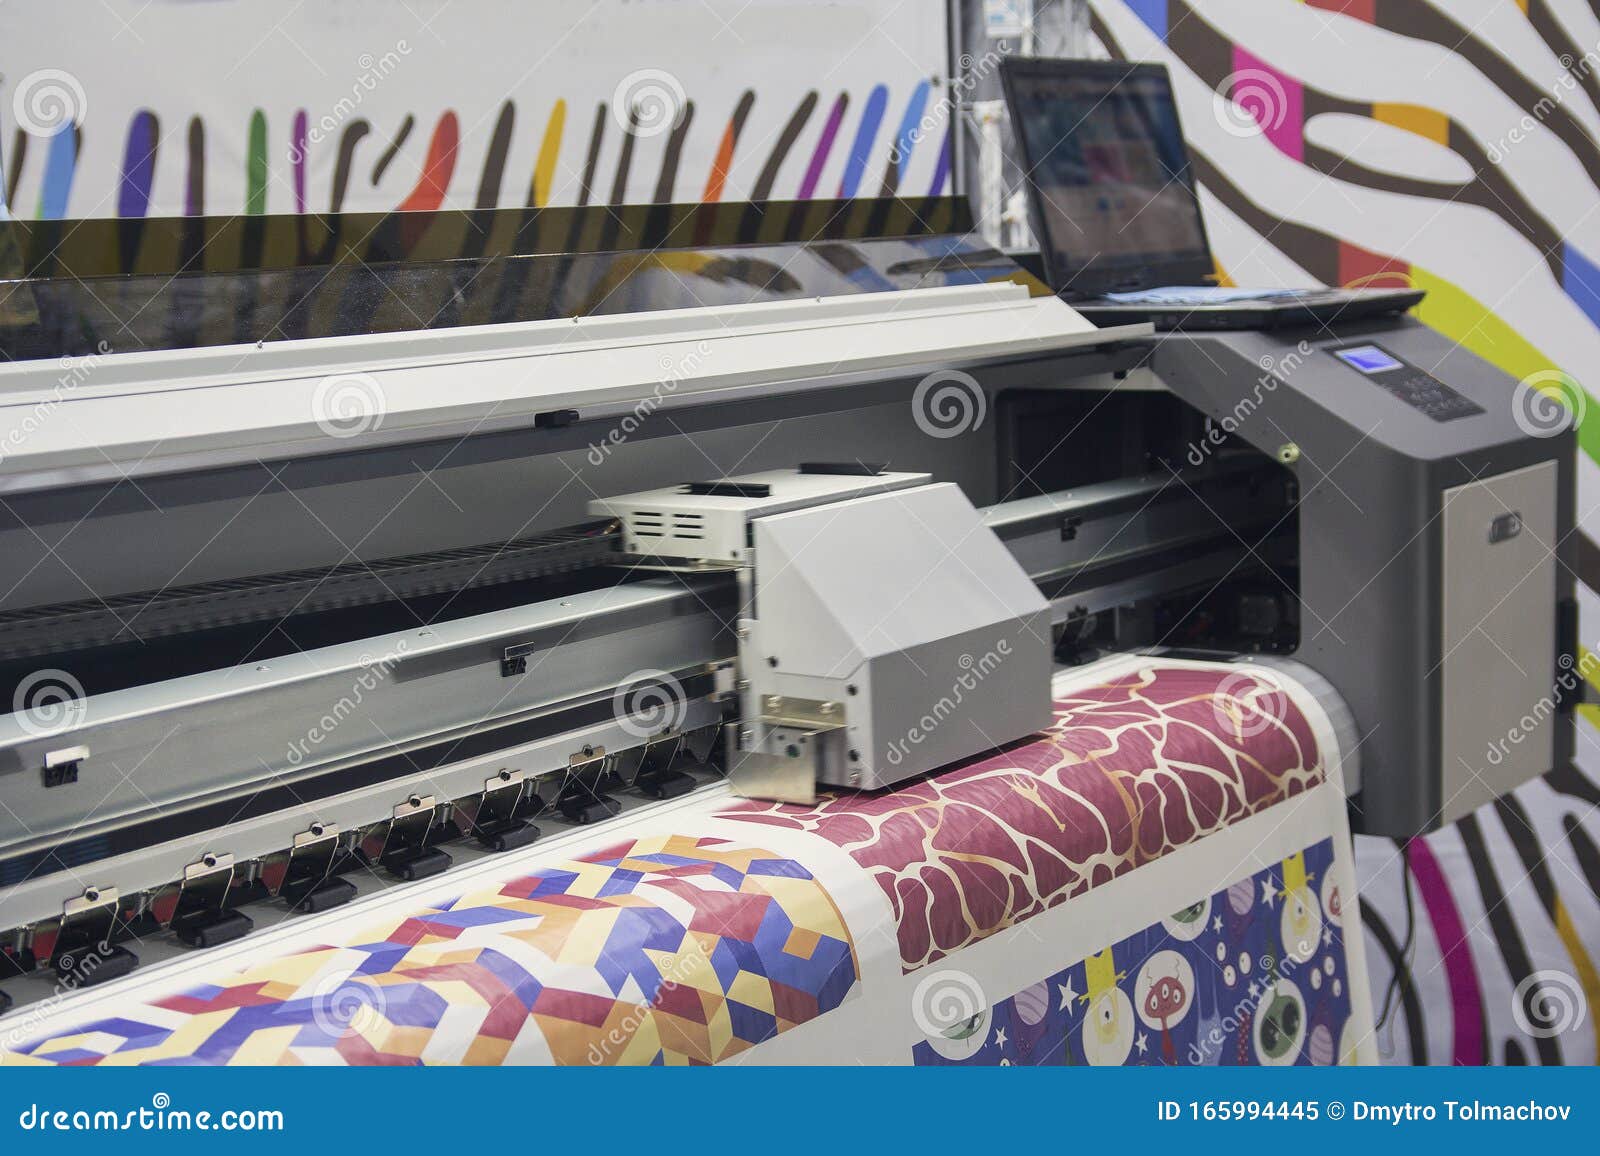 large format printing machine in operation